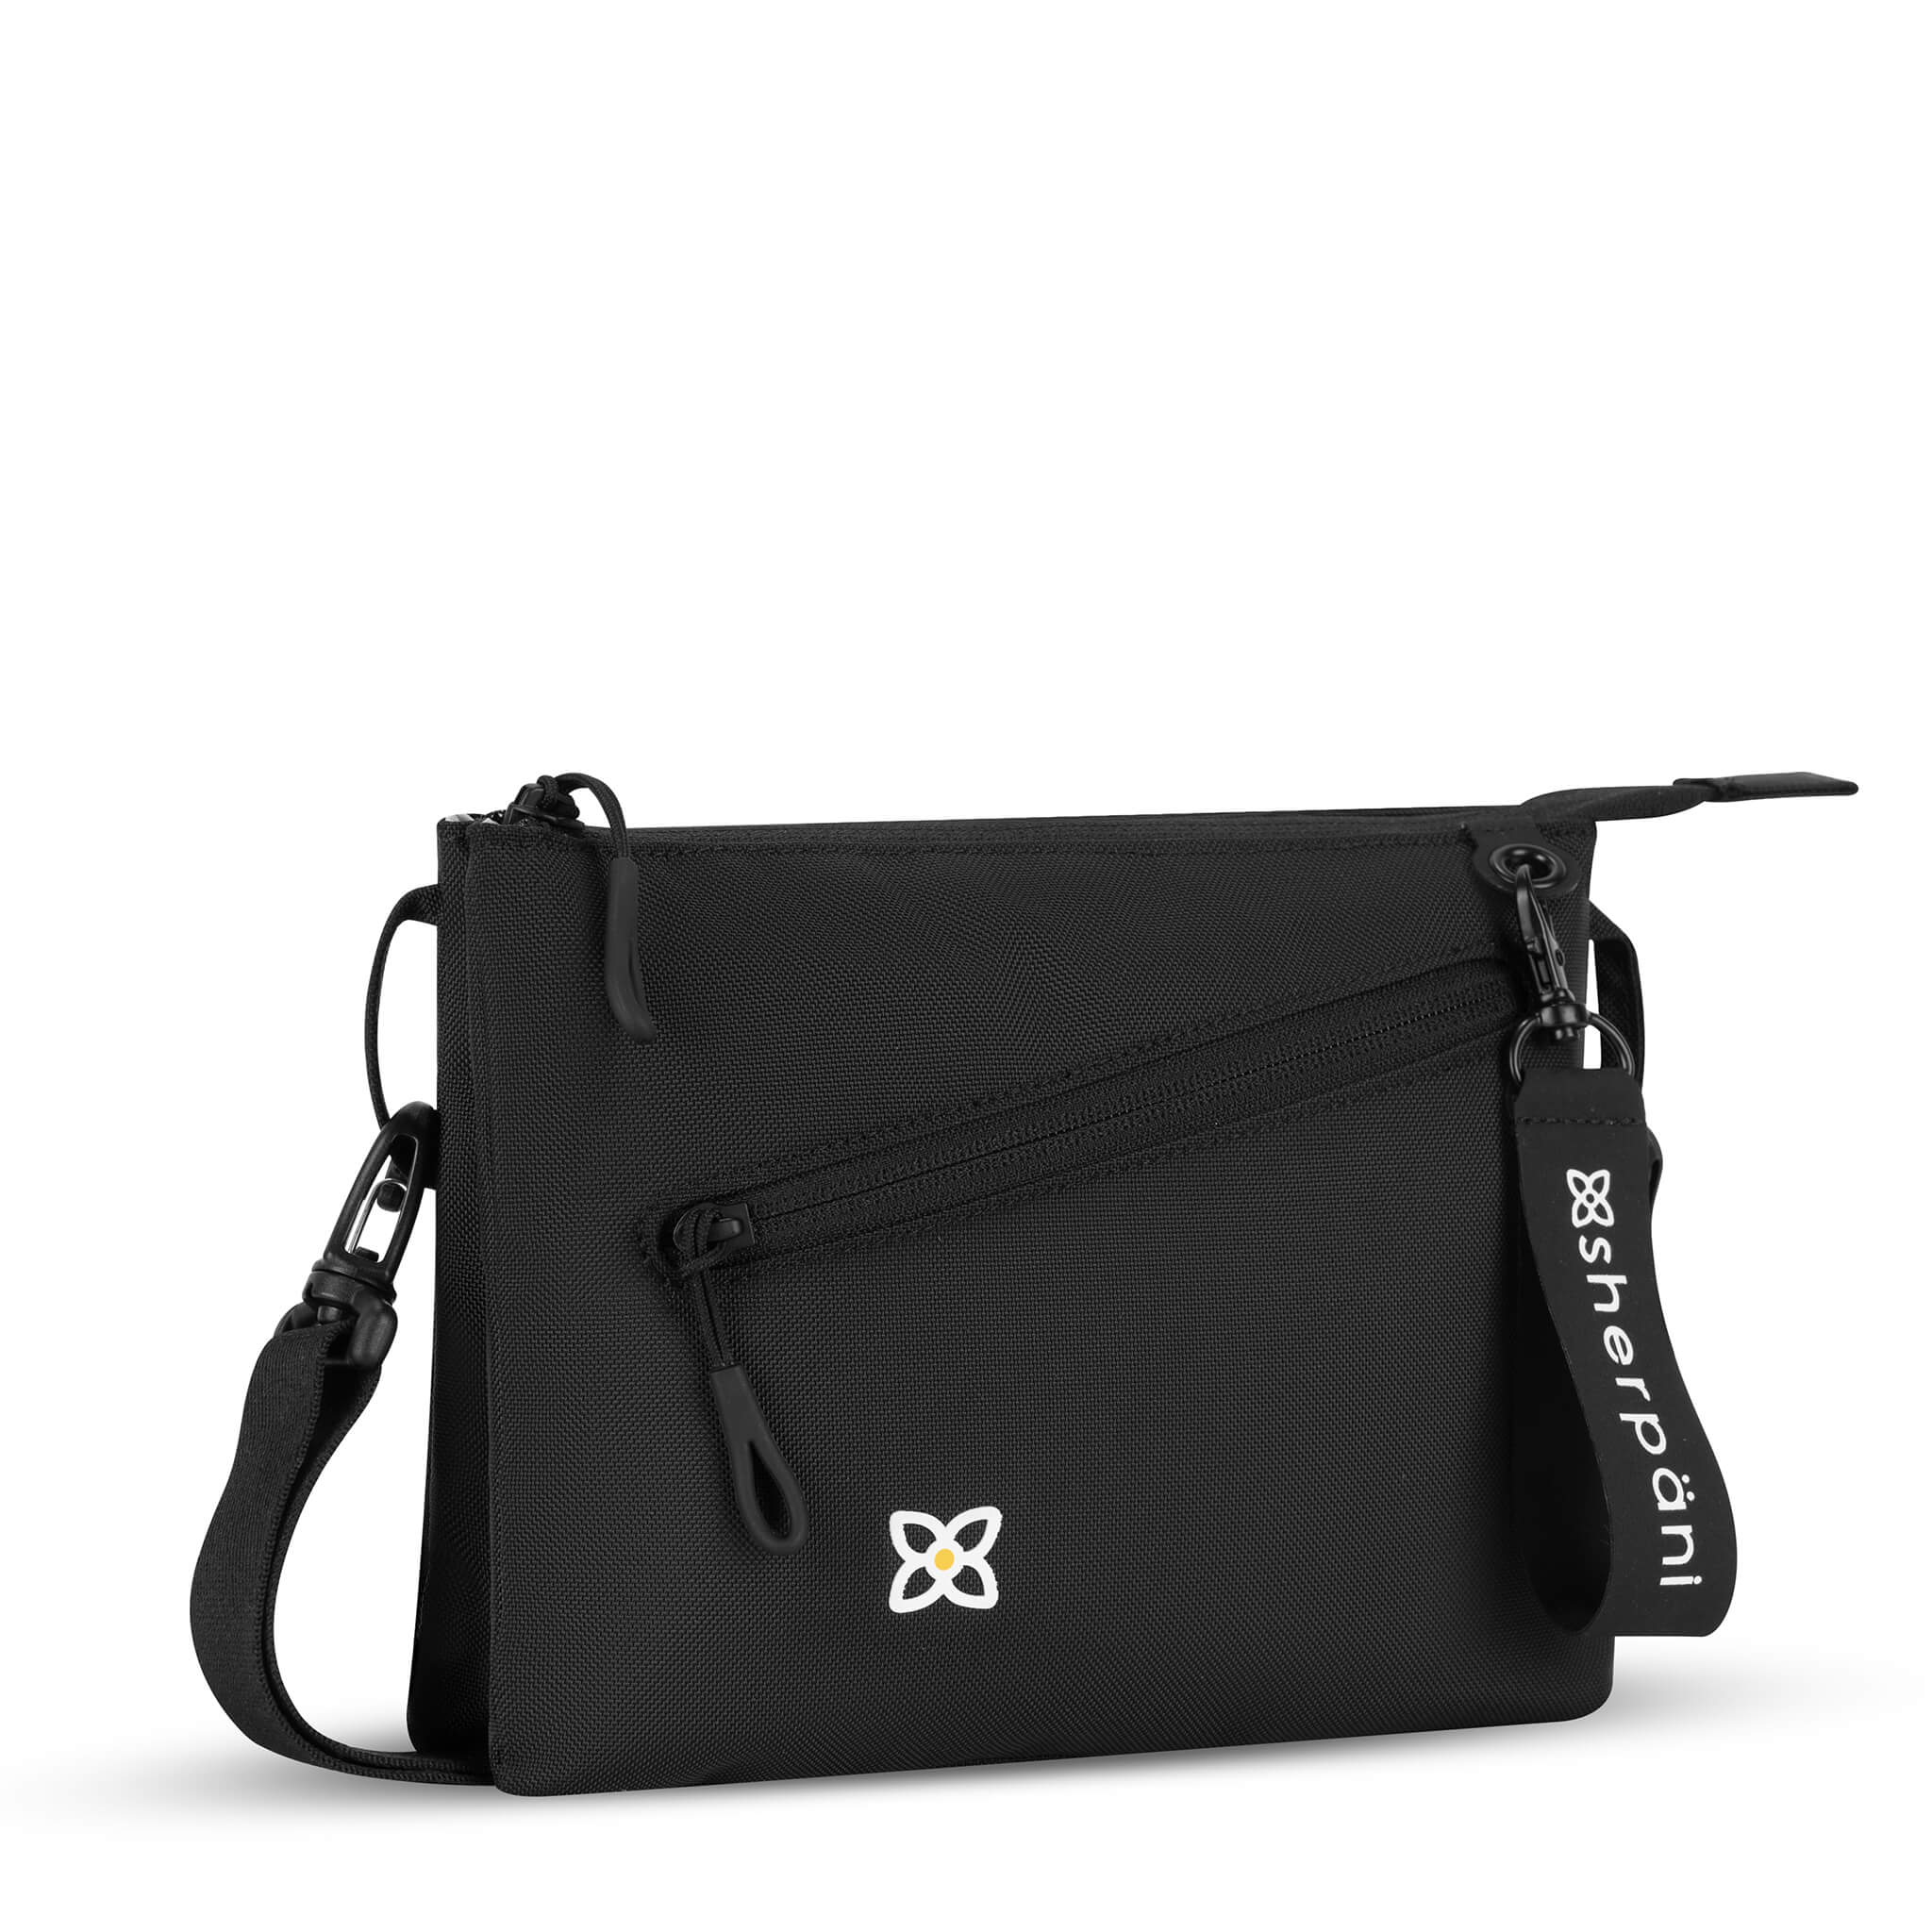 Angled front view of Sherpani small crossbody bag, the Zoom in Raven. Special features of the Zoom include RFID protection, adjustable crossbody strap, removable strap, removable keychain, outside zipper pocket, internal divider, internal zipper pockets and back slip pocket. The Raven color is solid black with Sherpani flower logo accented in white. 